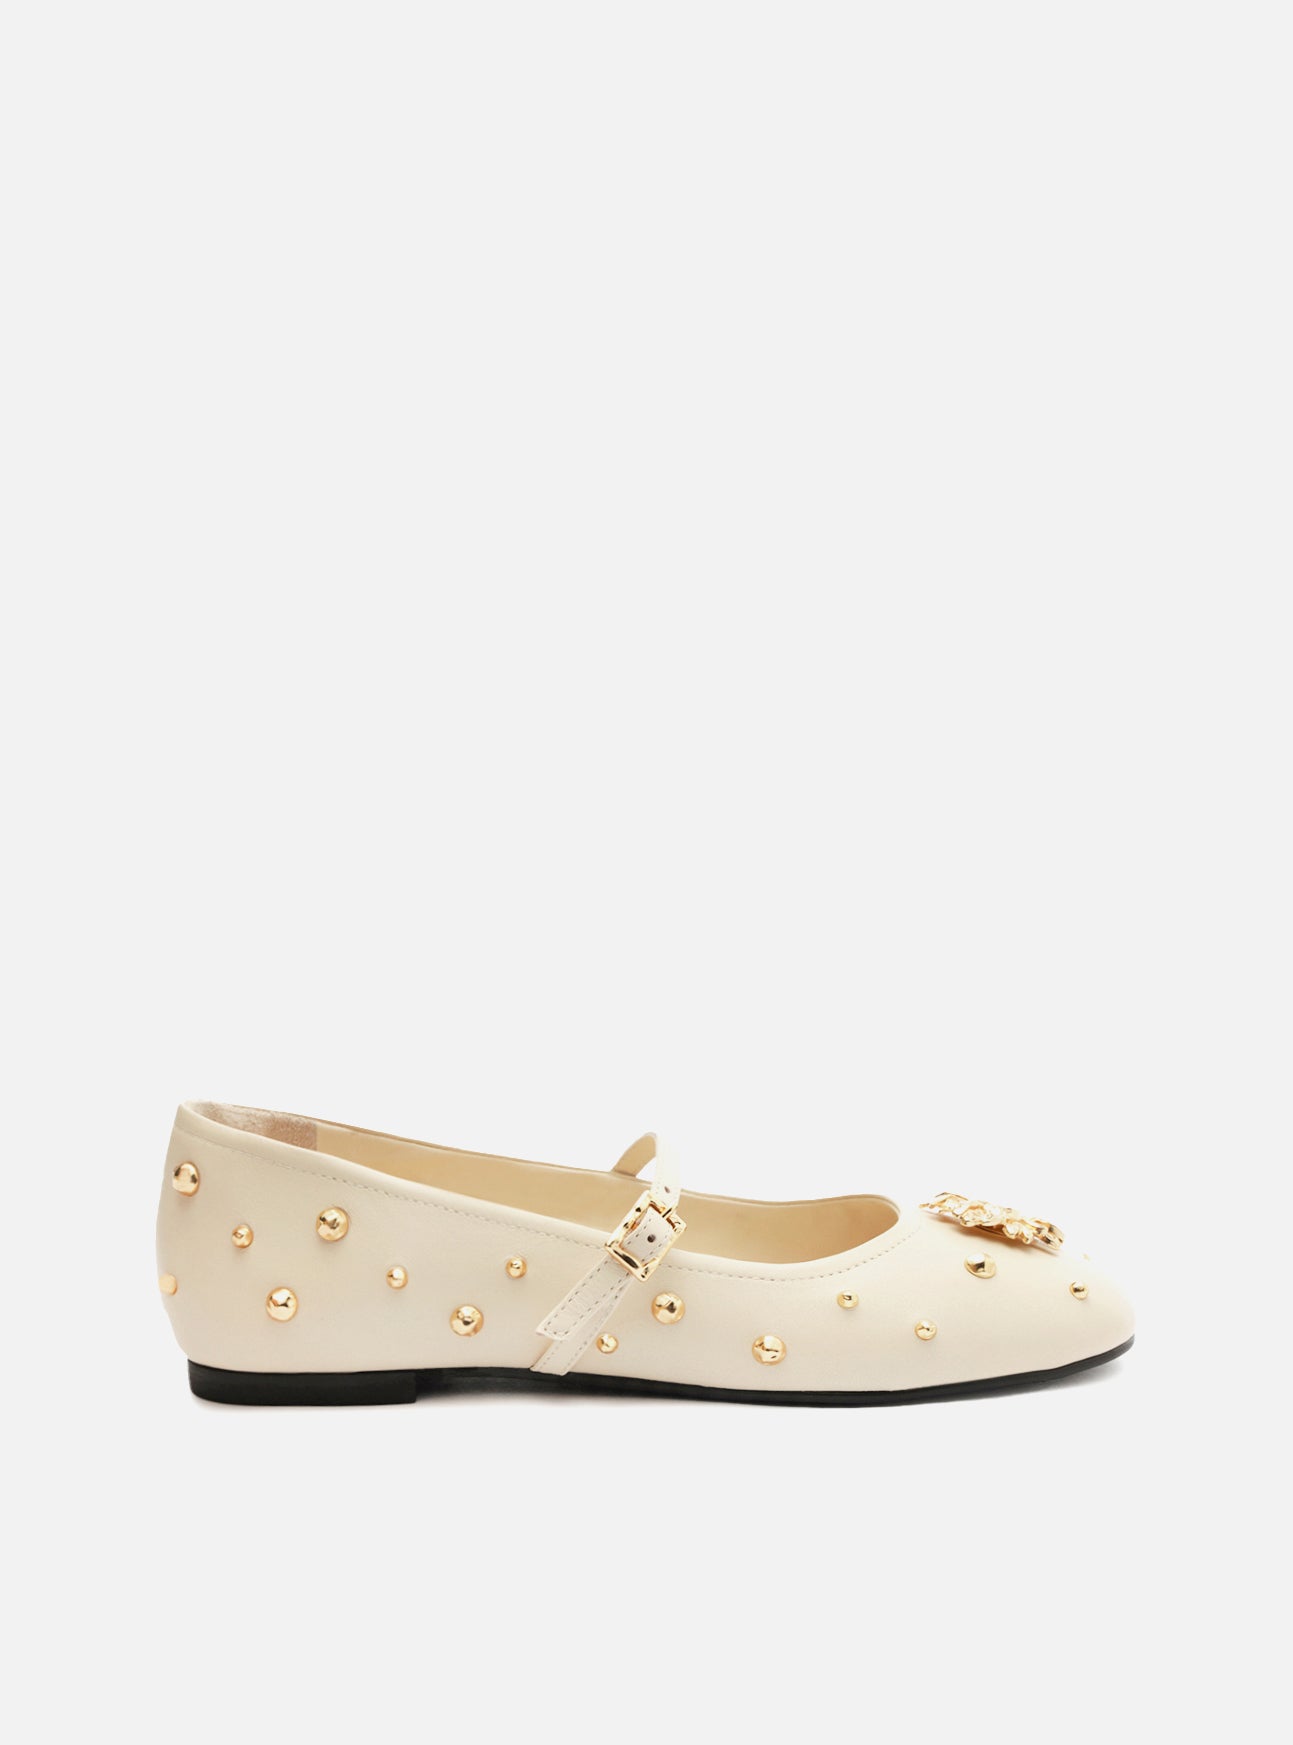 Beige ballet with metallic details throughout the shoe, flat and rounded toe. It is closed, with a round cutout on the vamp and a thin strap on the top with a side metal buckle.